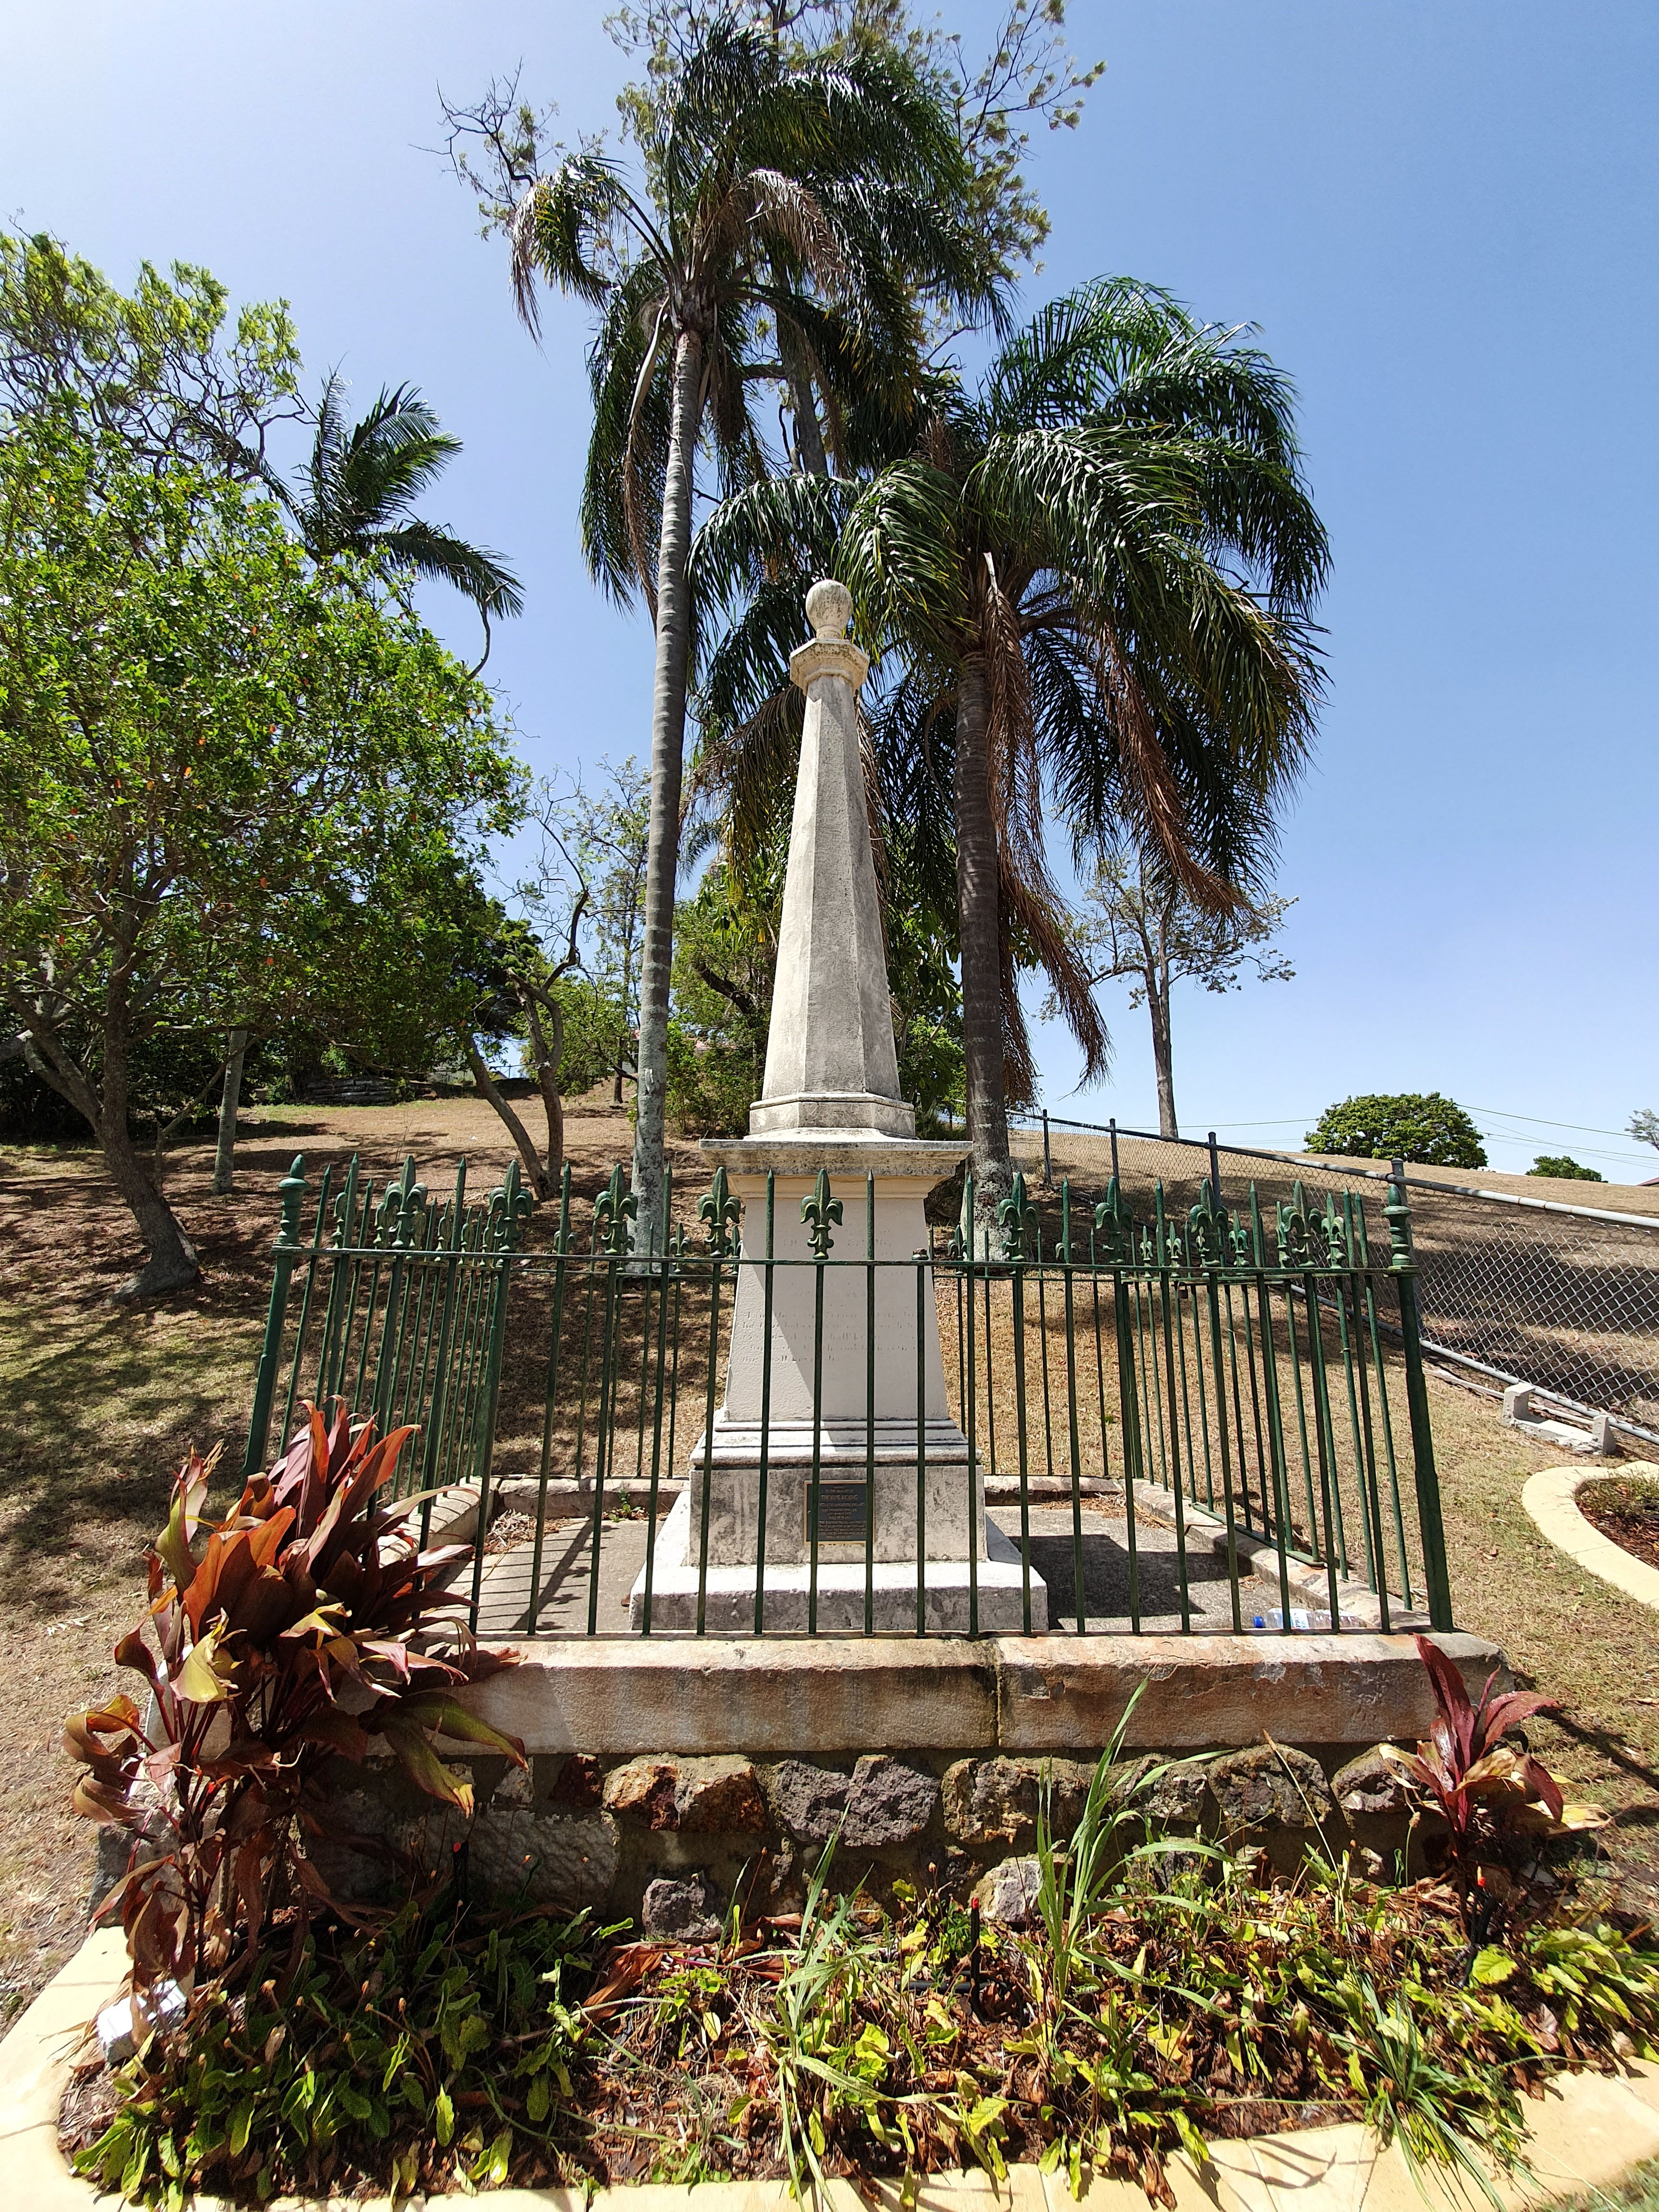 This is an image of a memorial located behind the Bulimba Uniting Church